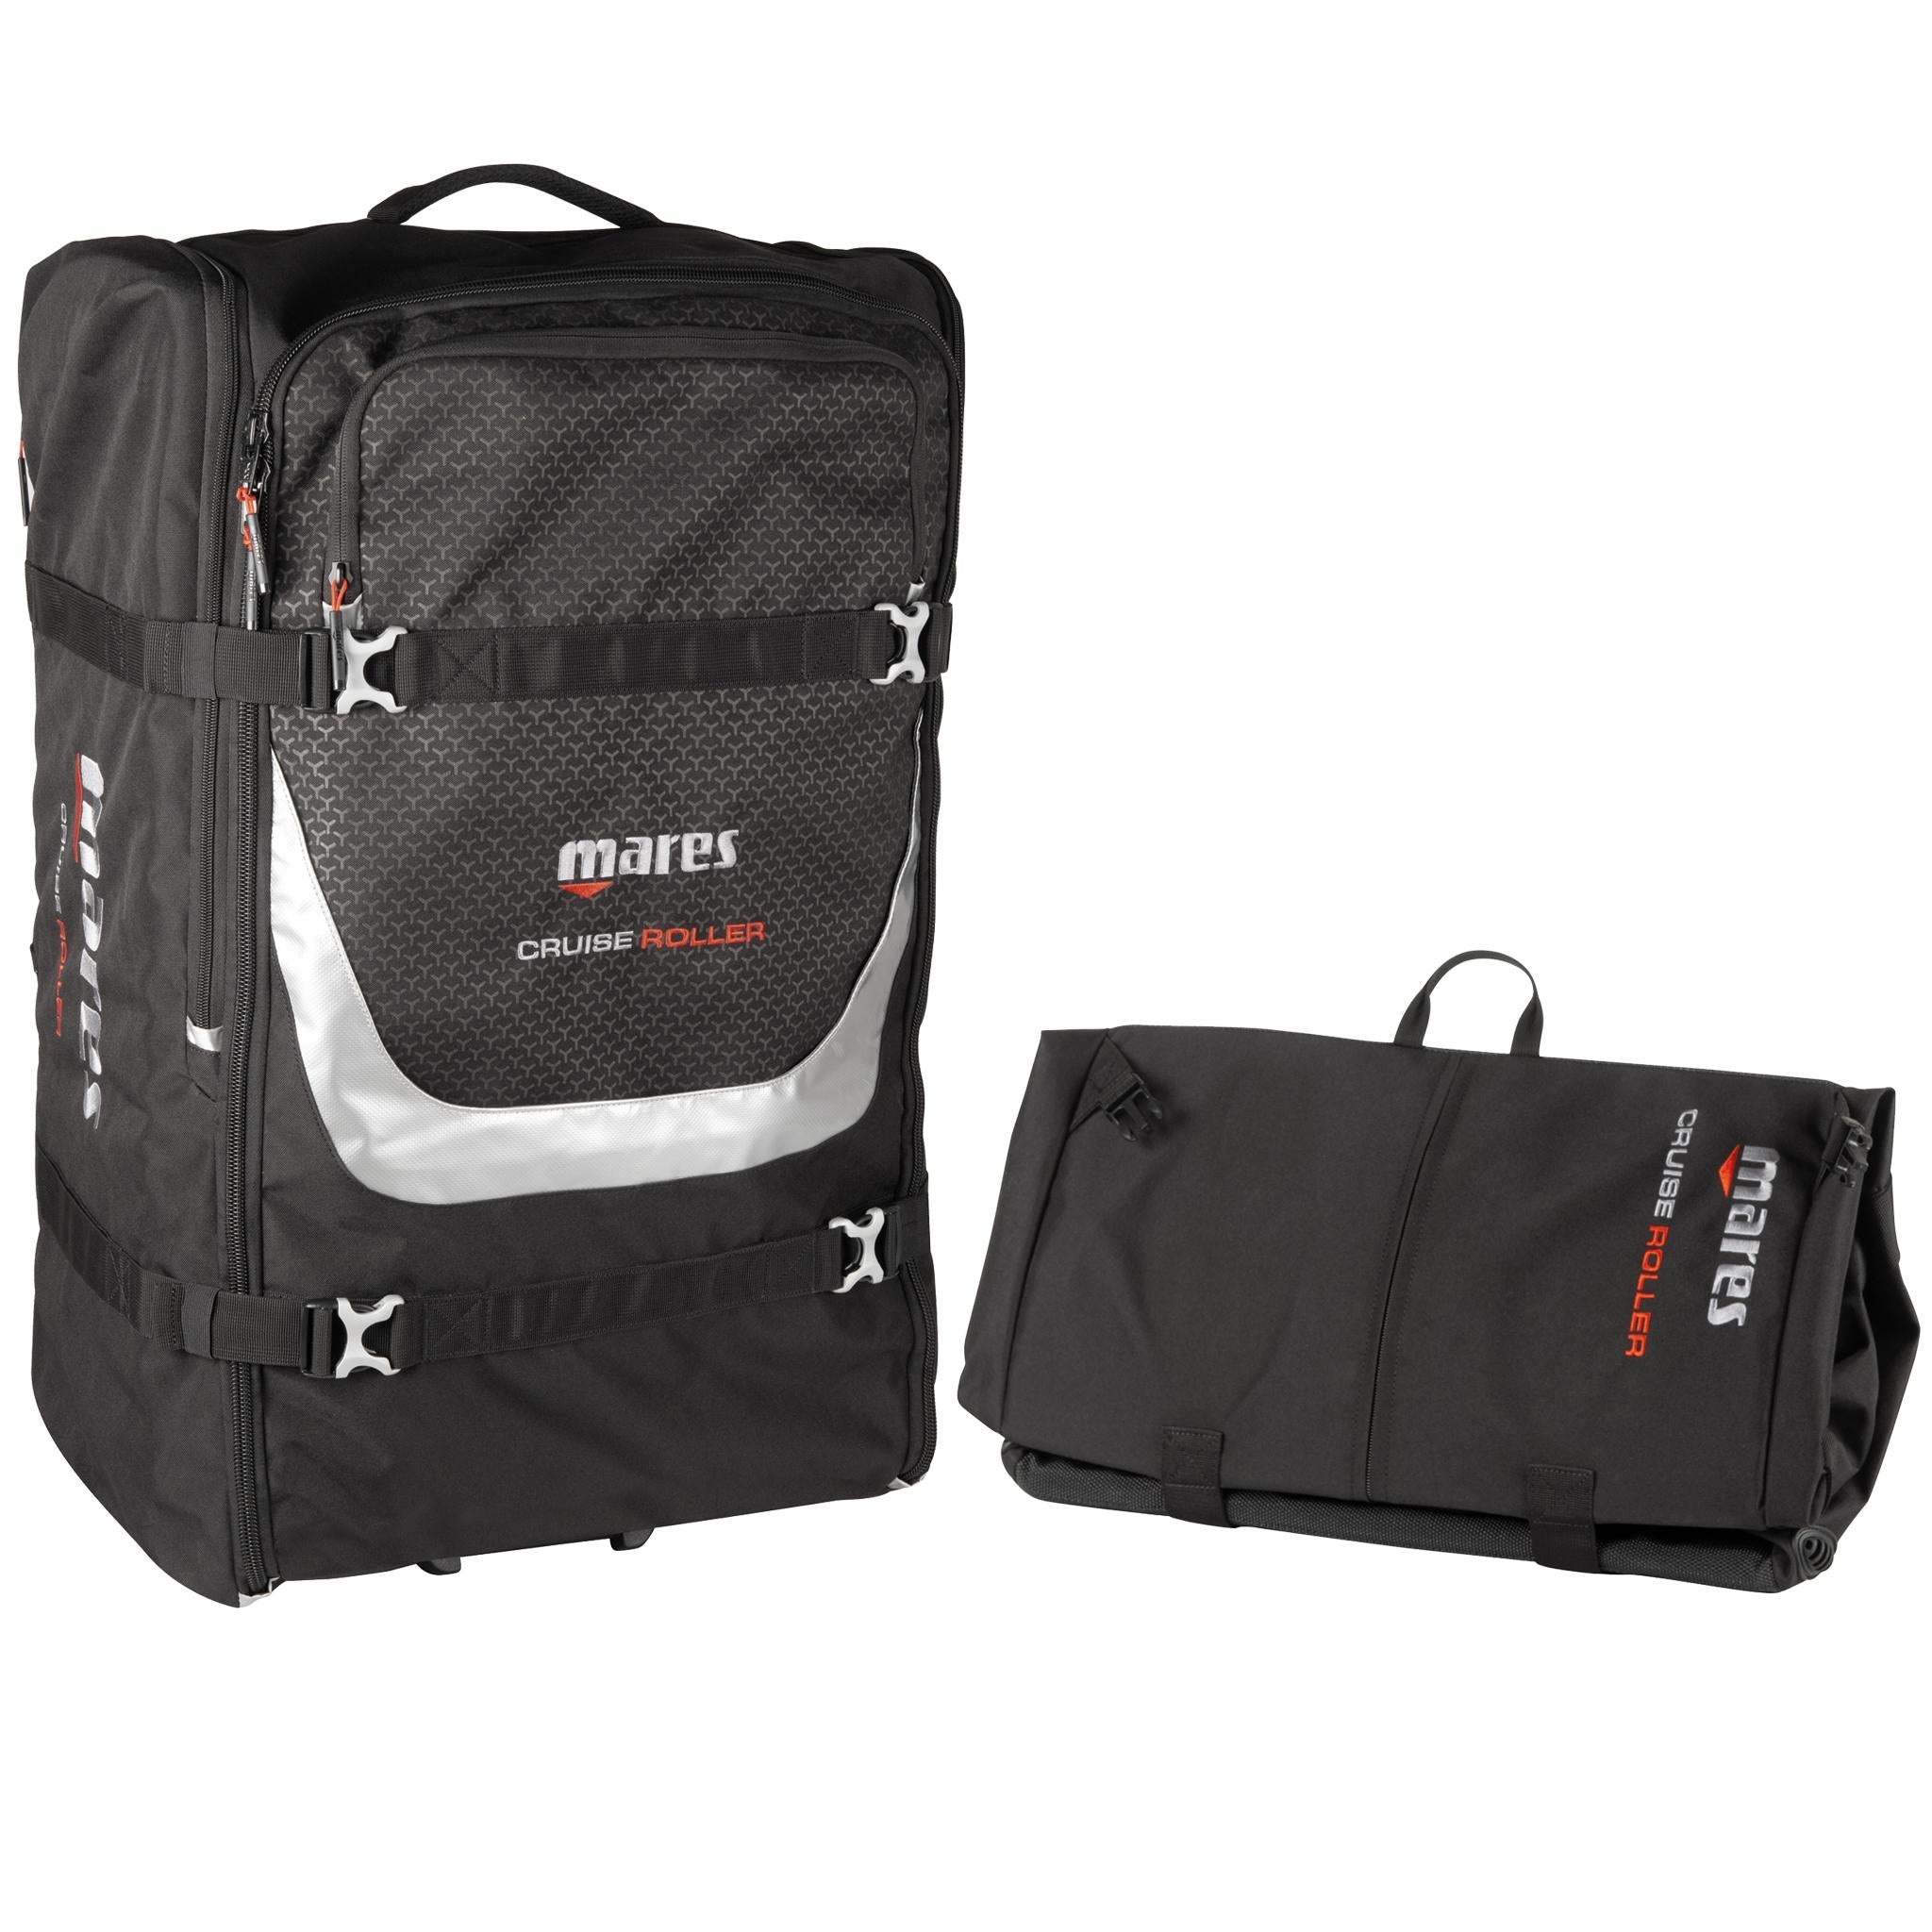 Mares Cruise Roller Foldaway Wheeled Dive Bag | Packed and Folded